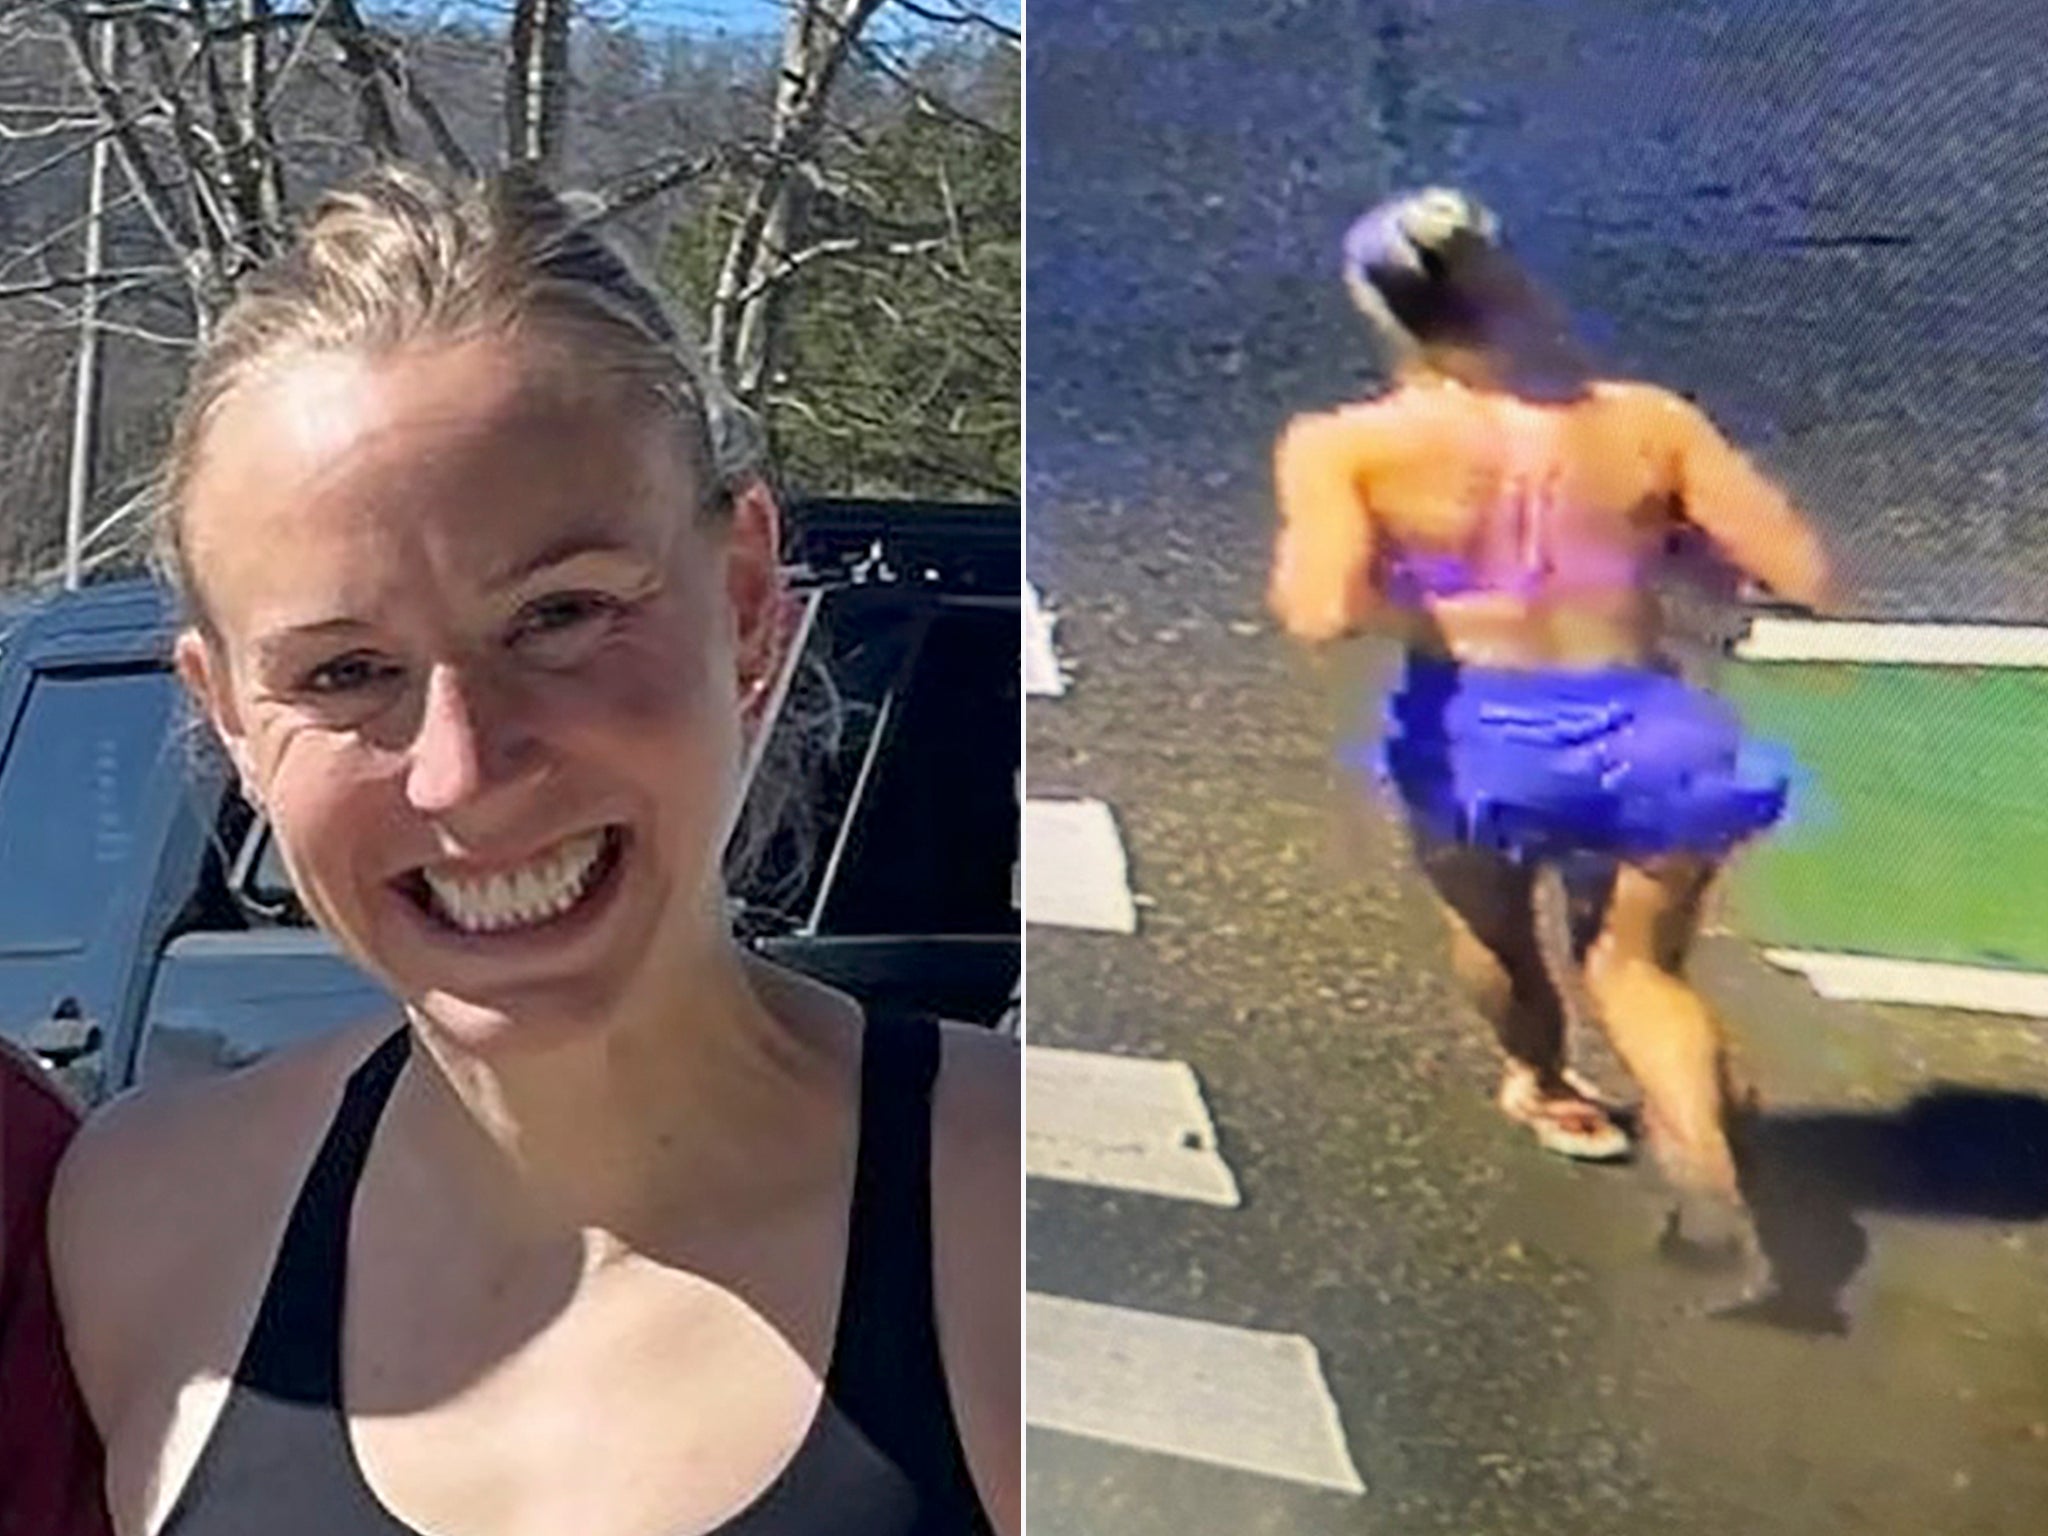 Eliza Fletcher (left) was abducted and killed while out for a run. She was captured on surveillance footage (right) moments before the attack